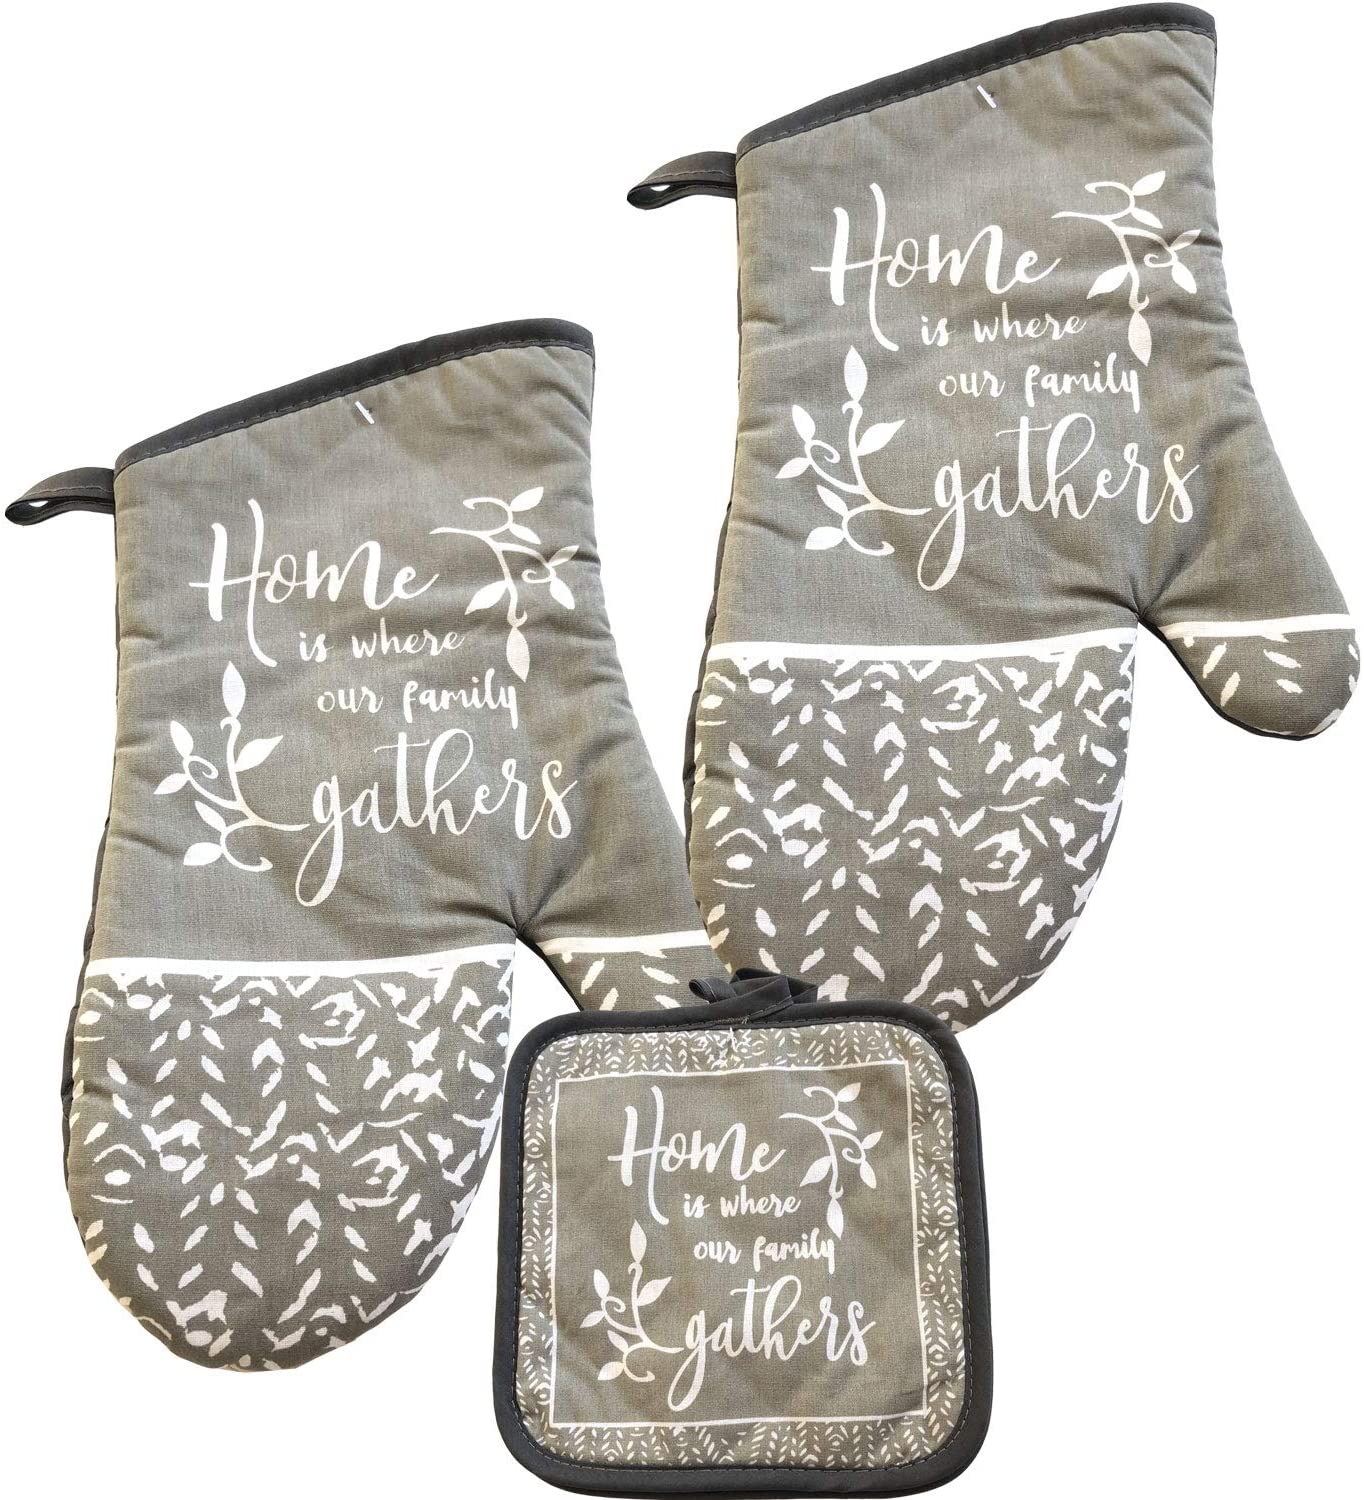 Oven Mitts, Pot Holders, and Other Kitchen Linens